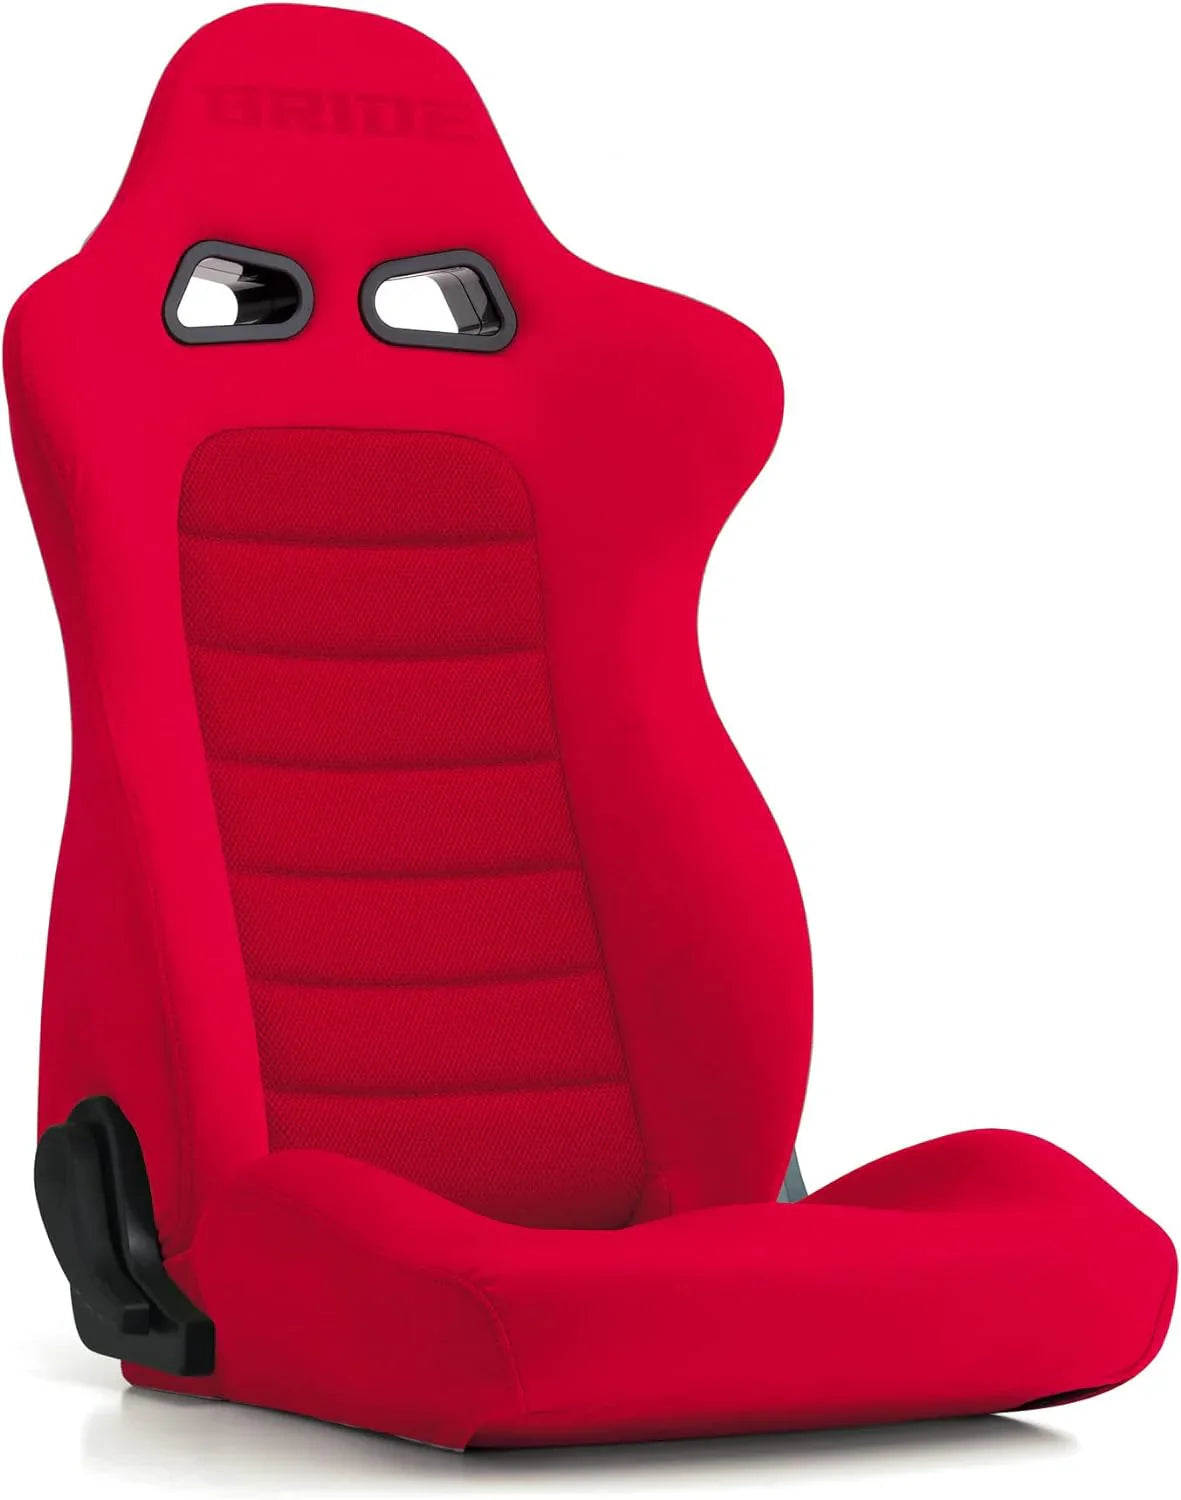 Bride Euroster II Reclinable Seat in Red